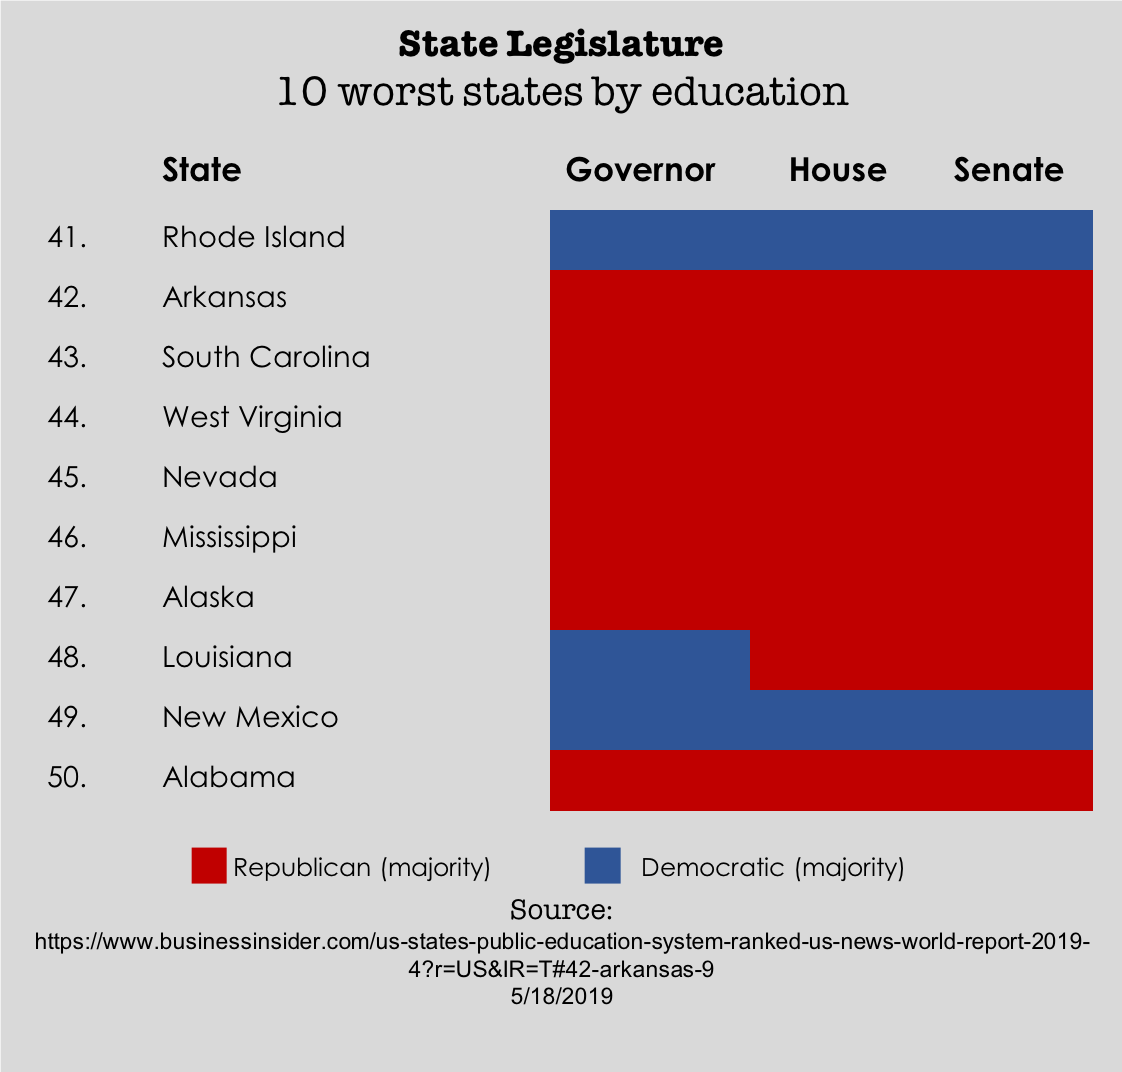 Infographic State Legislature in the 10 worst states ranked by